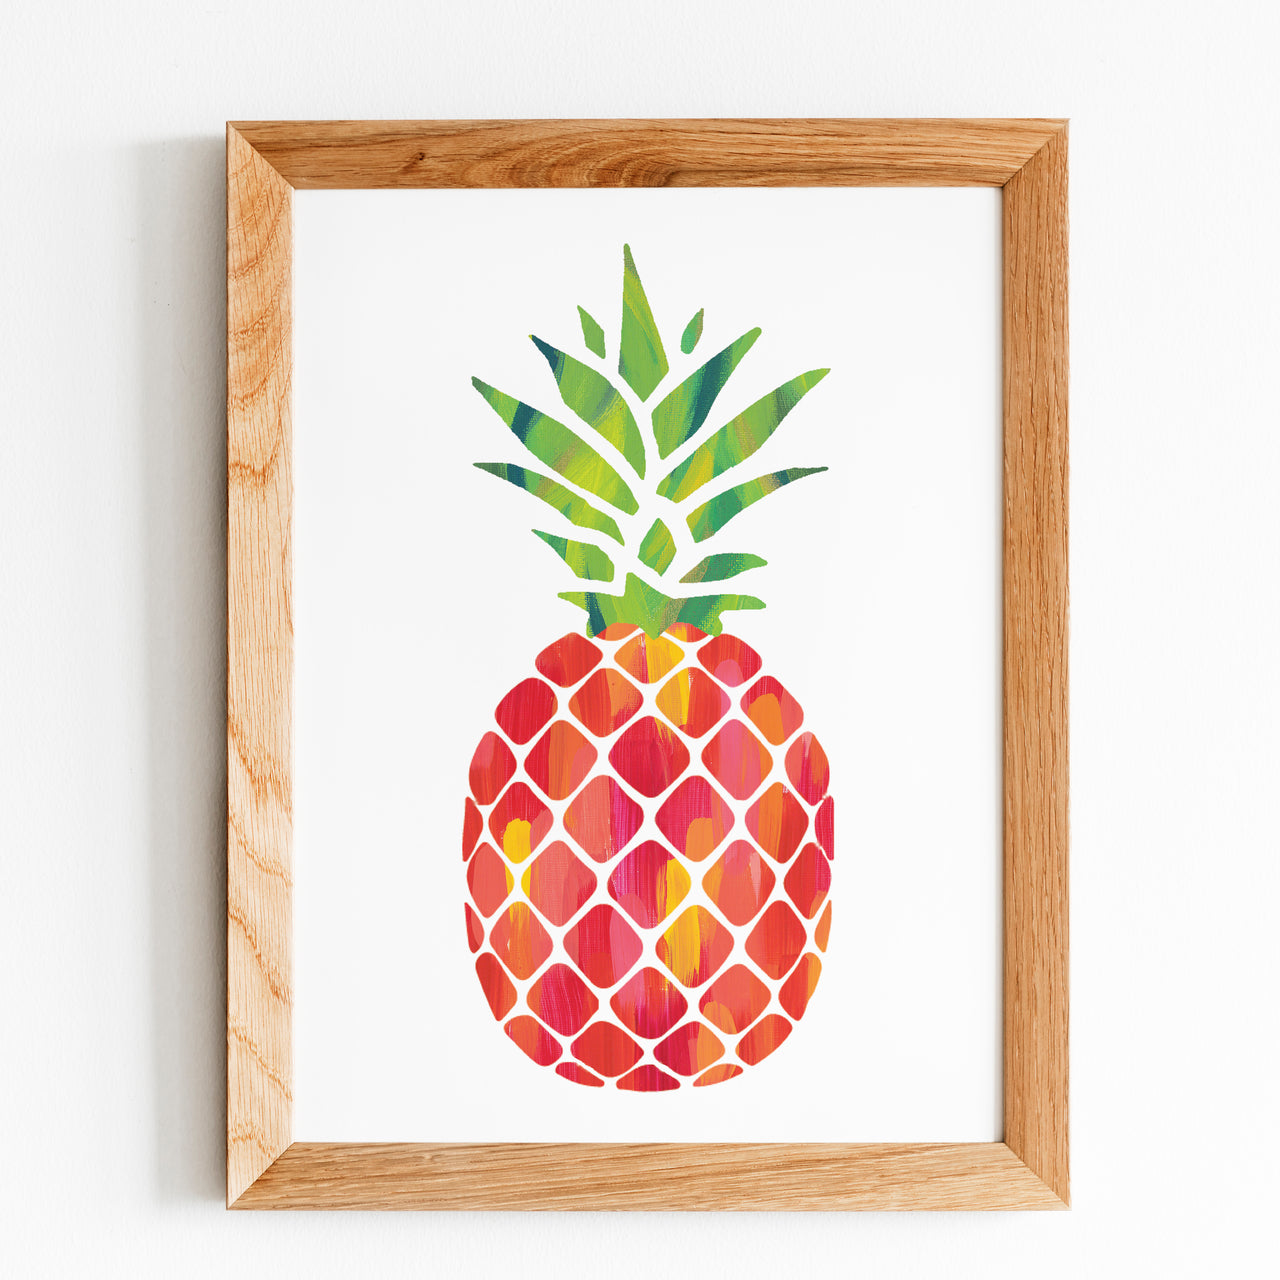 Bright Pink Pineapple Print by Gert & Co